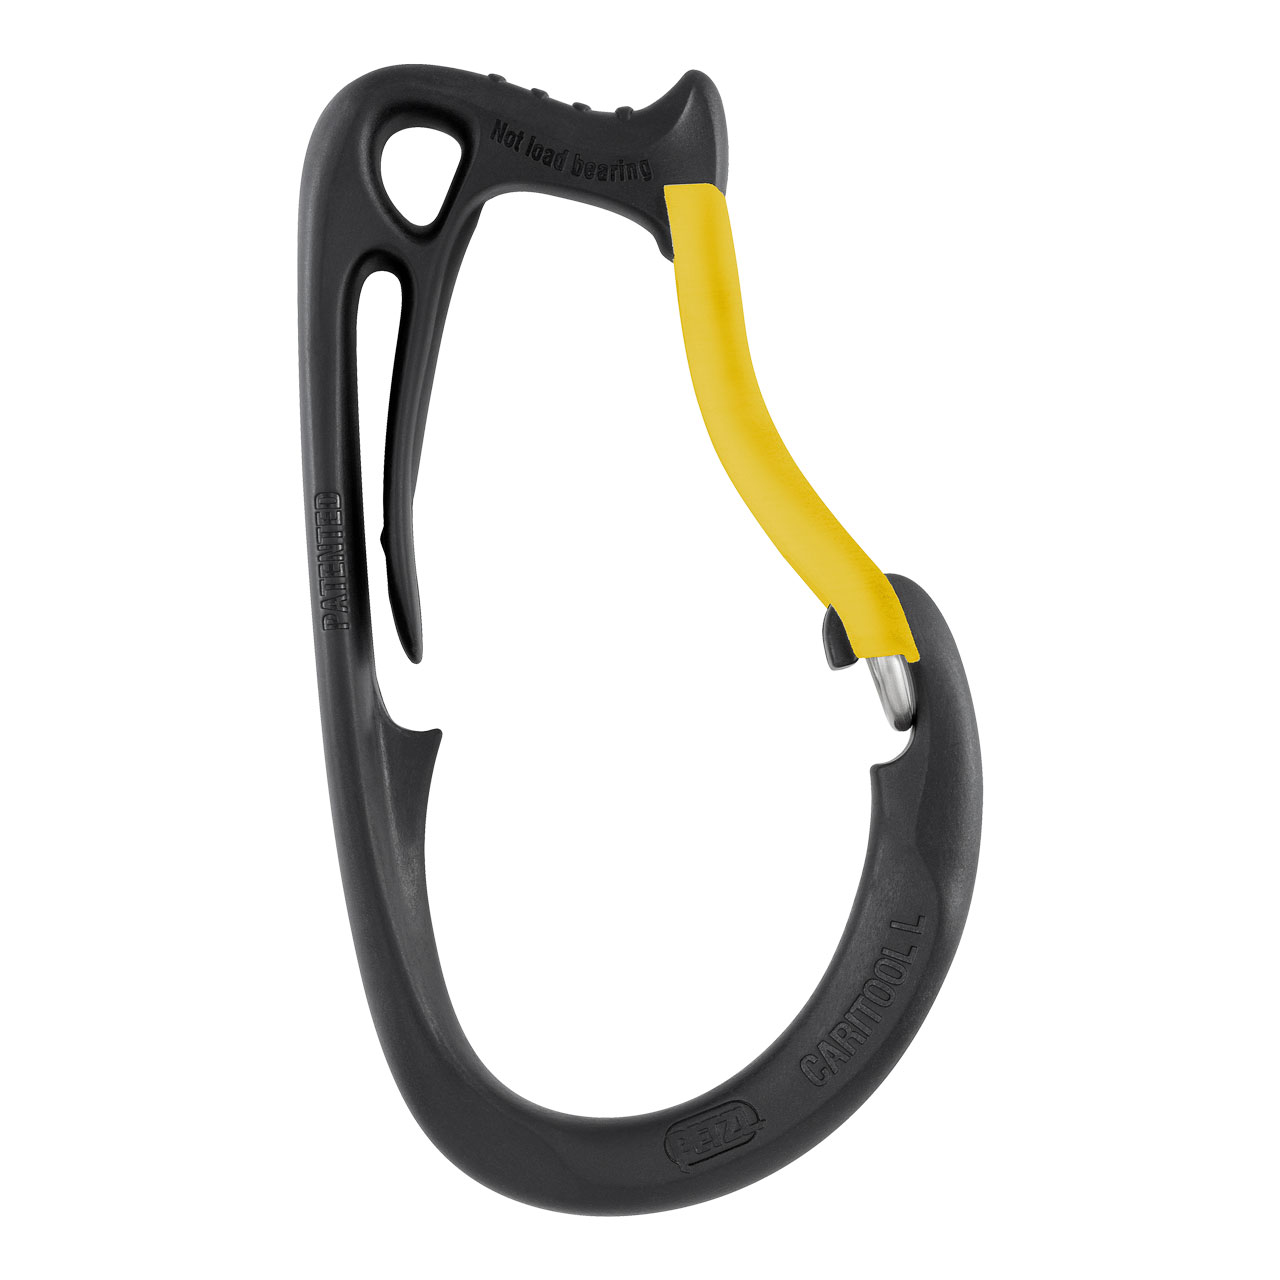 Sequoia Tree Climbing Harness by Petzl